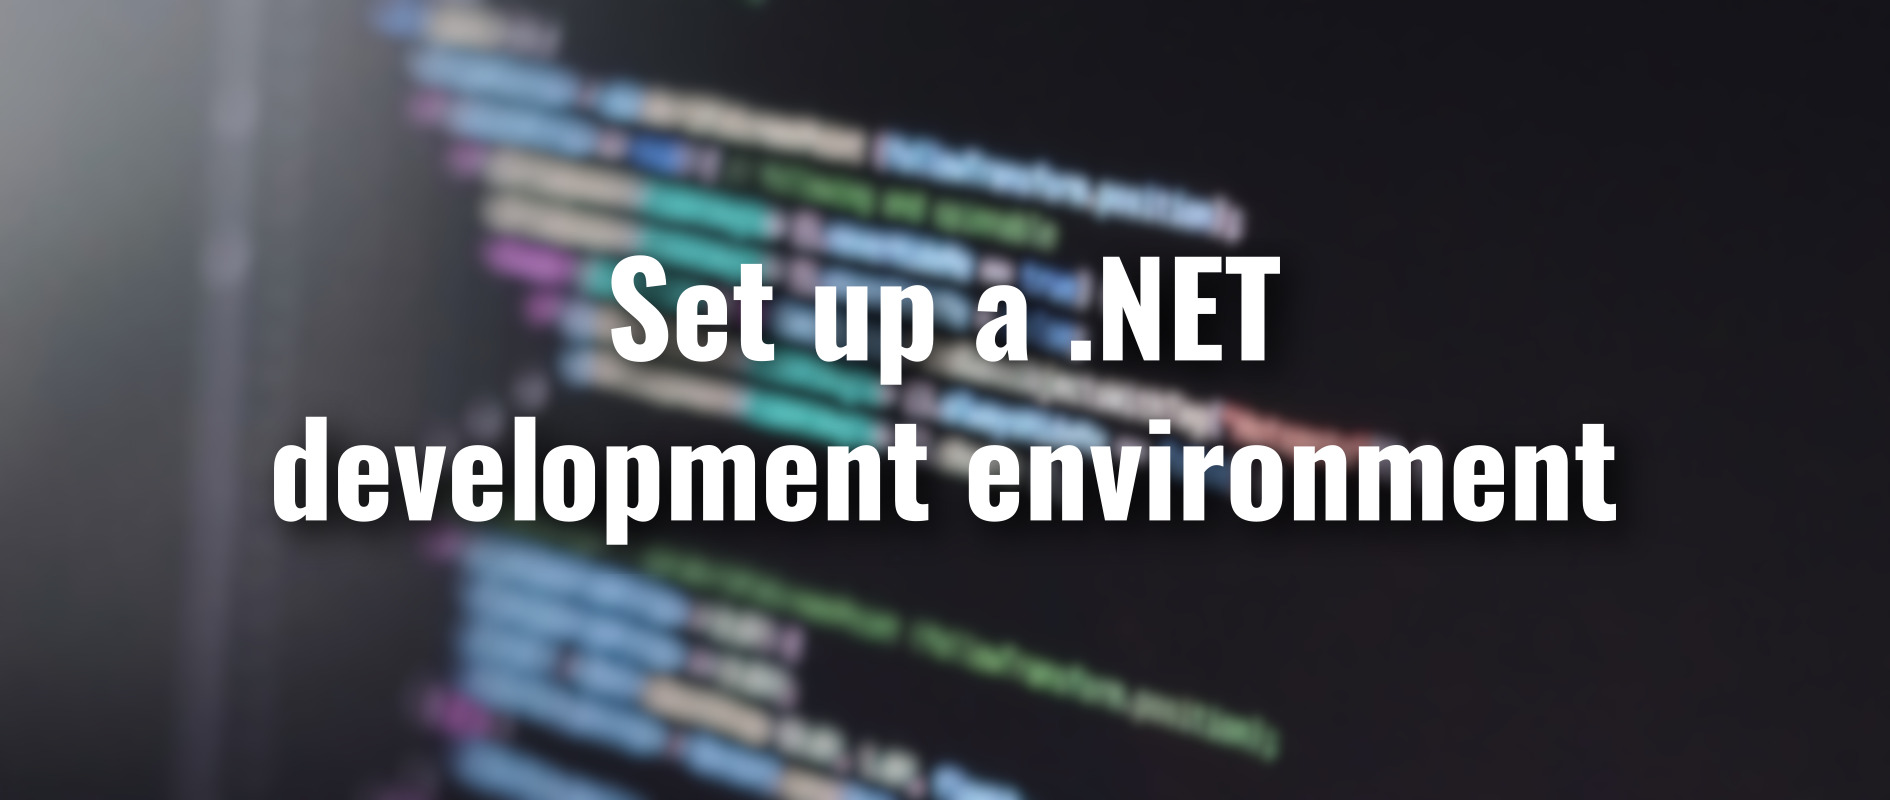 Since the release of .NET Core, .NET developers are able to develop applications for and in GNU/Linux using languages like C#. If you are a .NET devel